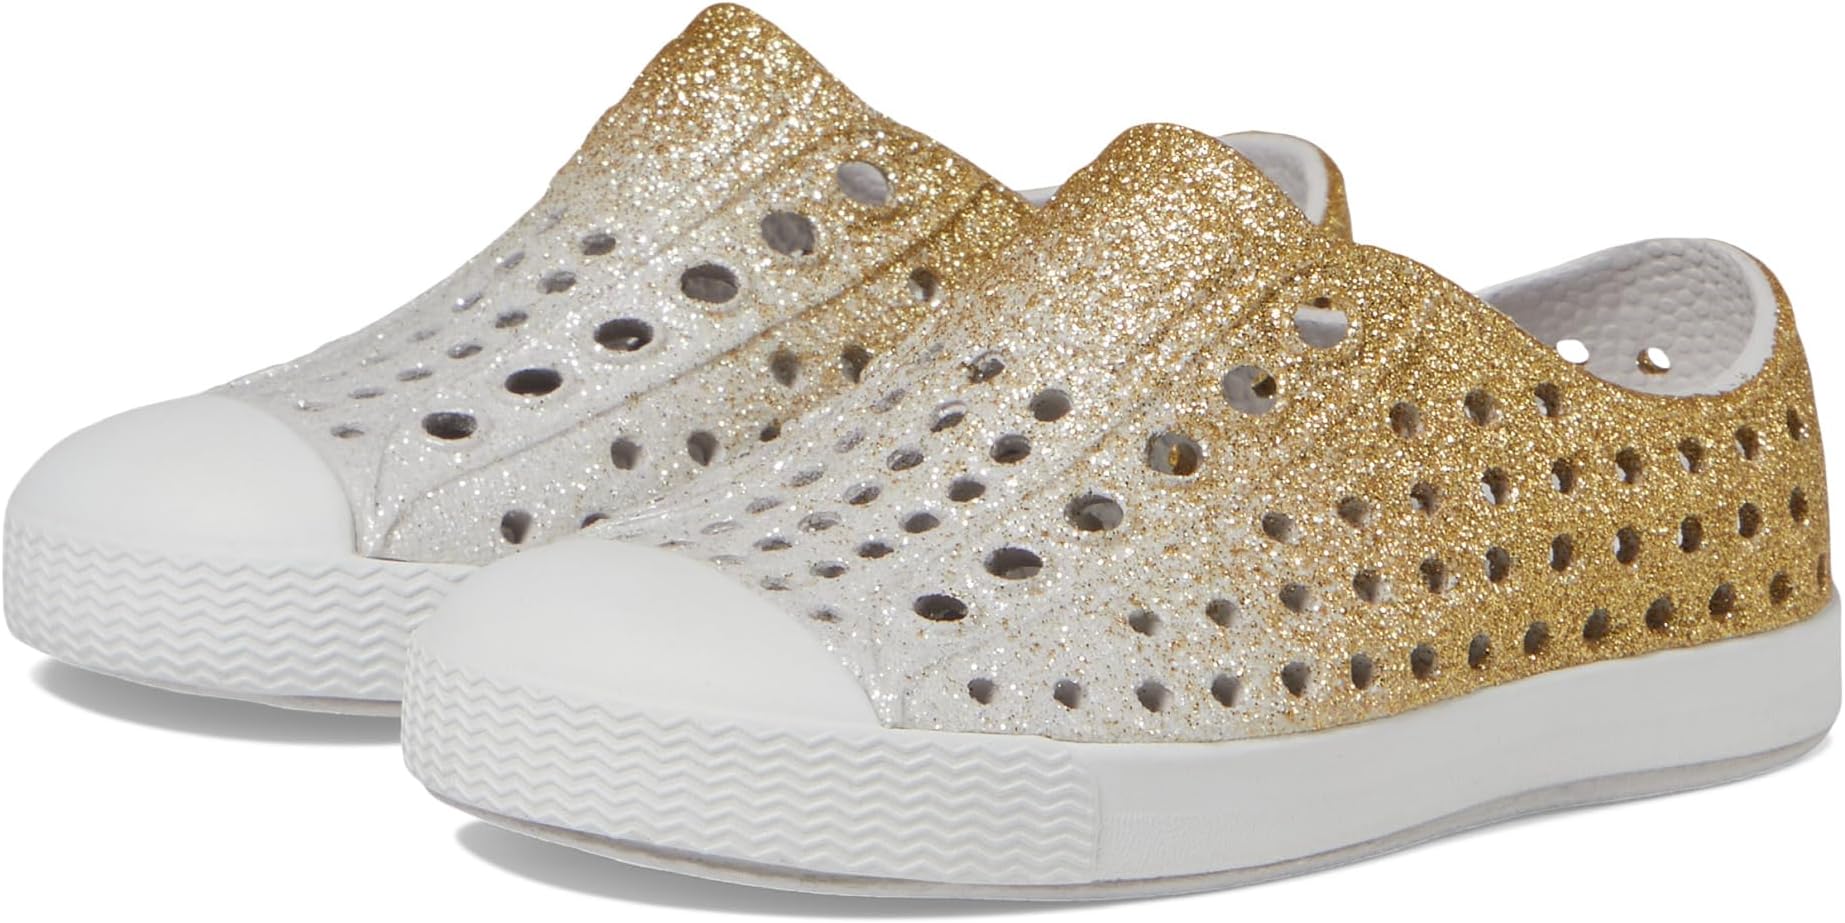 Кроссовки Jefferson Bling Native Shoes Kids, цвет Gold Frost Bling/Shell White girls ballet flats baby dance party girls shoes glitter children shoes gold bling princess shoes 3 12 years kids shoes mch026s